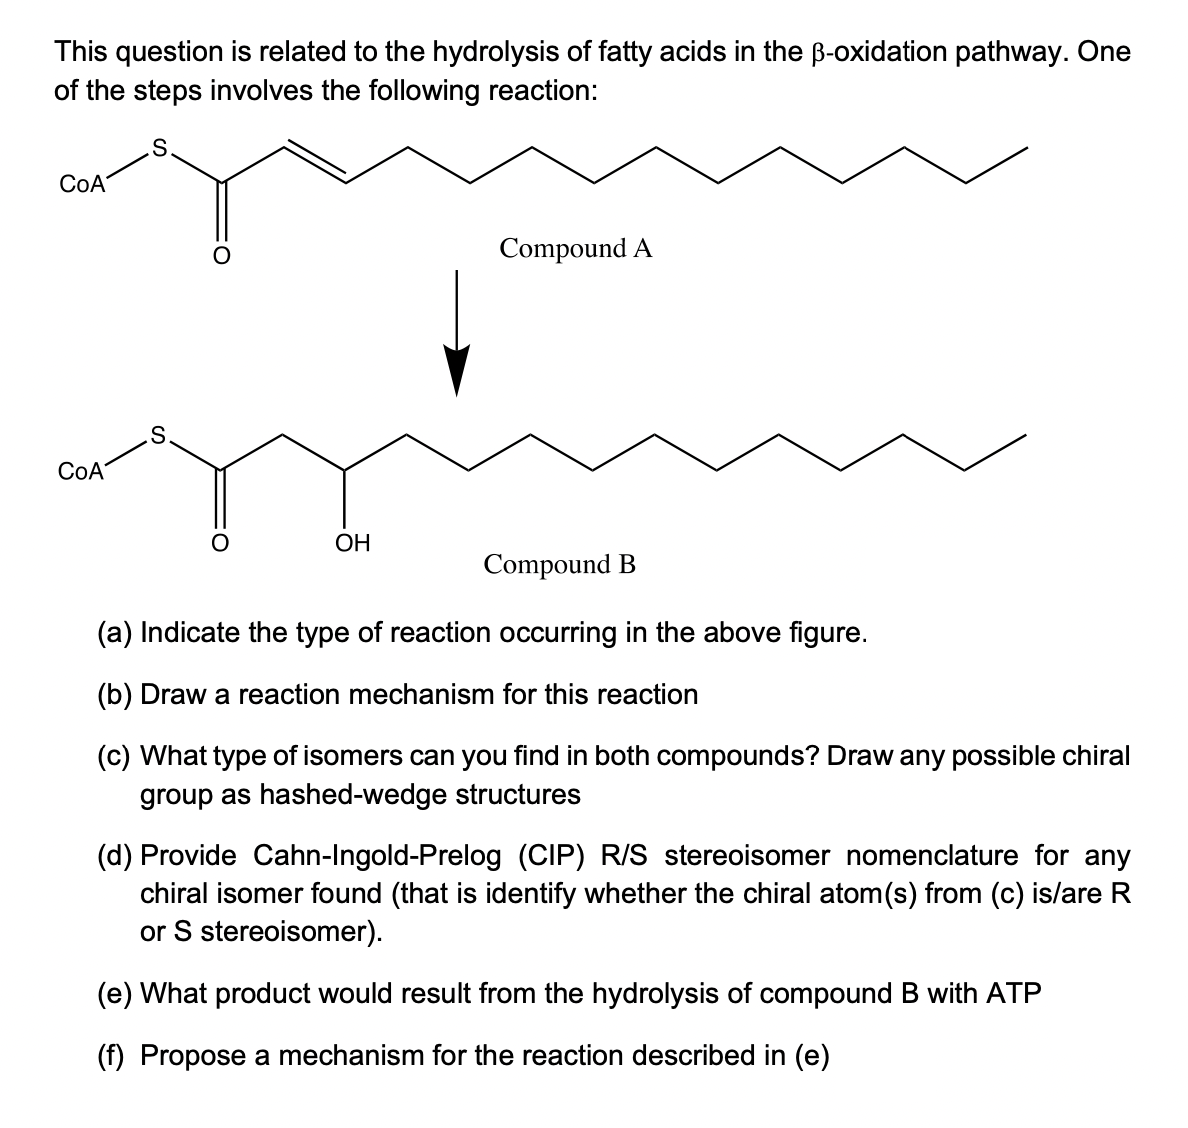 This question is related to the hydrolysis of fatty acids in the ß-oxidation pathway. One
of the steps involves the following reaction:
COA
Compound A
COA
OH
Compound B
(a) Indicate the type of reaction occurring in the above figure.
(b) Draw a reaction mechanism for this reaction
(c) What type of isomers can you find in both compounds? Draw any possible chiral
group as hashed-wedge structures
(d) Provide Cahn-Ingold-Prelog (CIP) R/S stereoisomer nomenclature for any
chiral isomer found (that is identify whether the chiral atom(s) from (c) is/are R
or S stereoisomer).
(e) What product would result from the hydrolysis of compound B with ATP
(f) Propose a mechanism for the reaction described in (e)
S